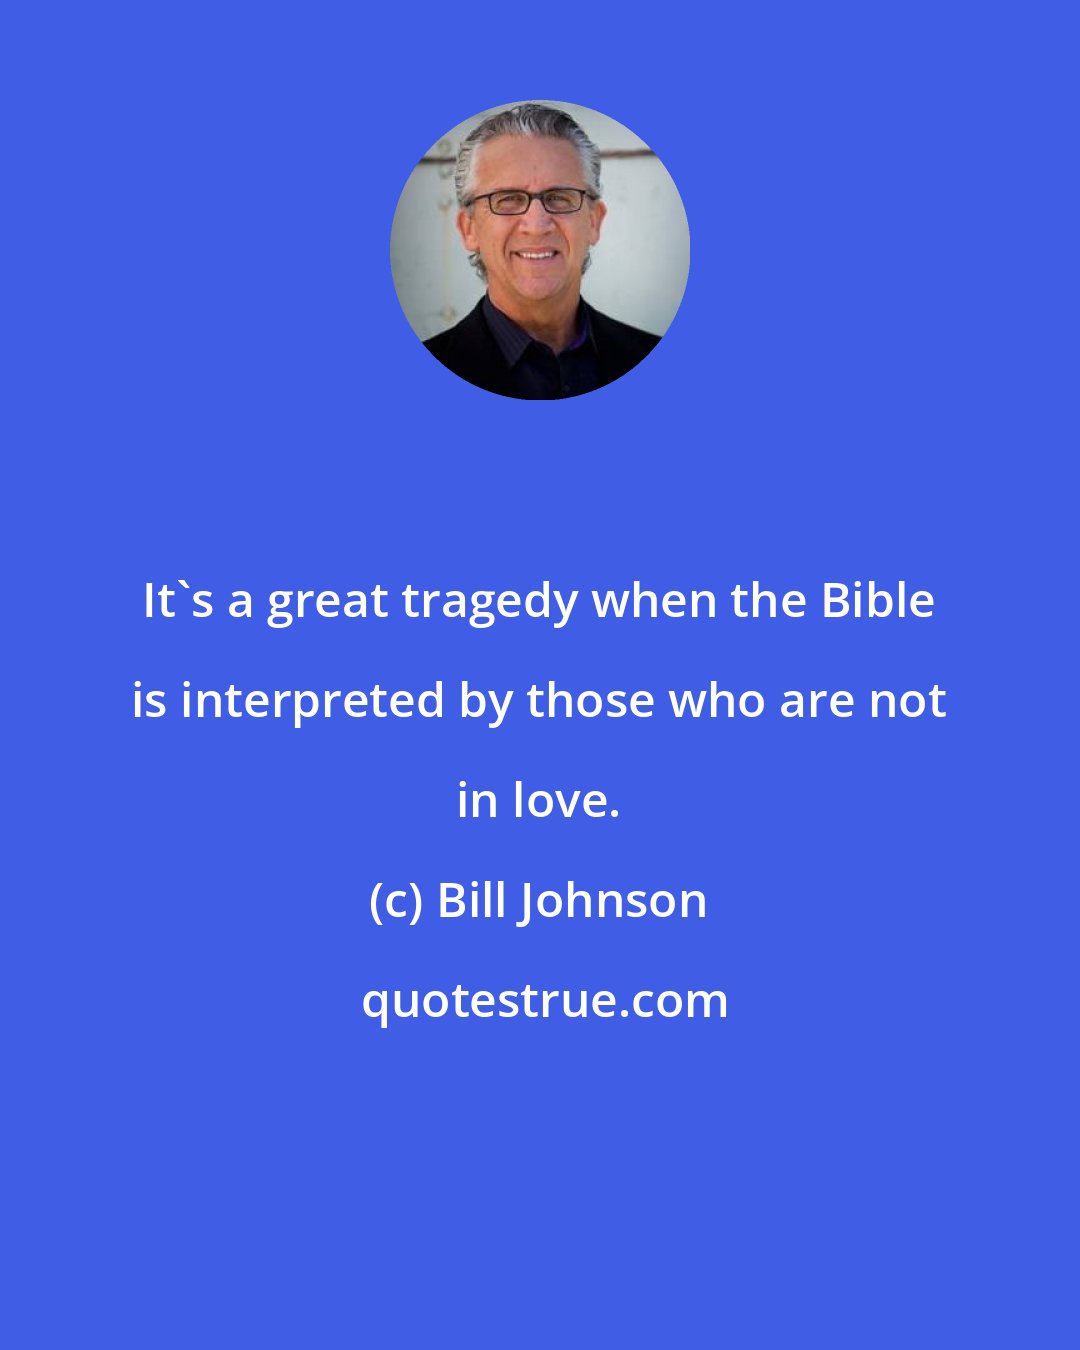 Bill Johnson: It's a great tragedy when the Bible is interpreted by those who are not in love.